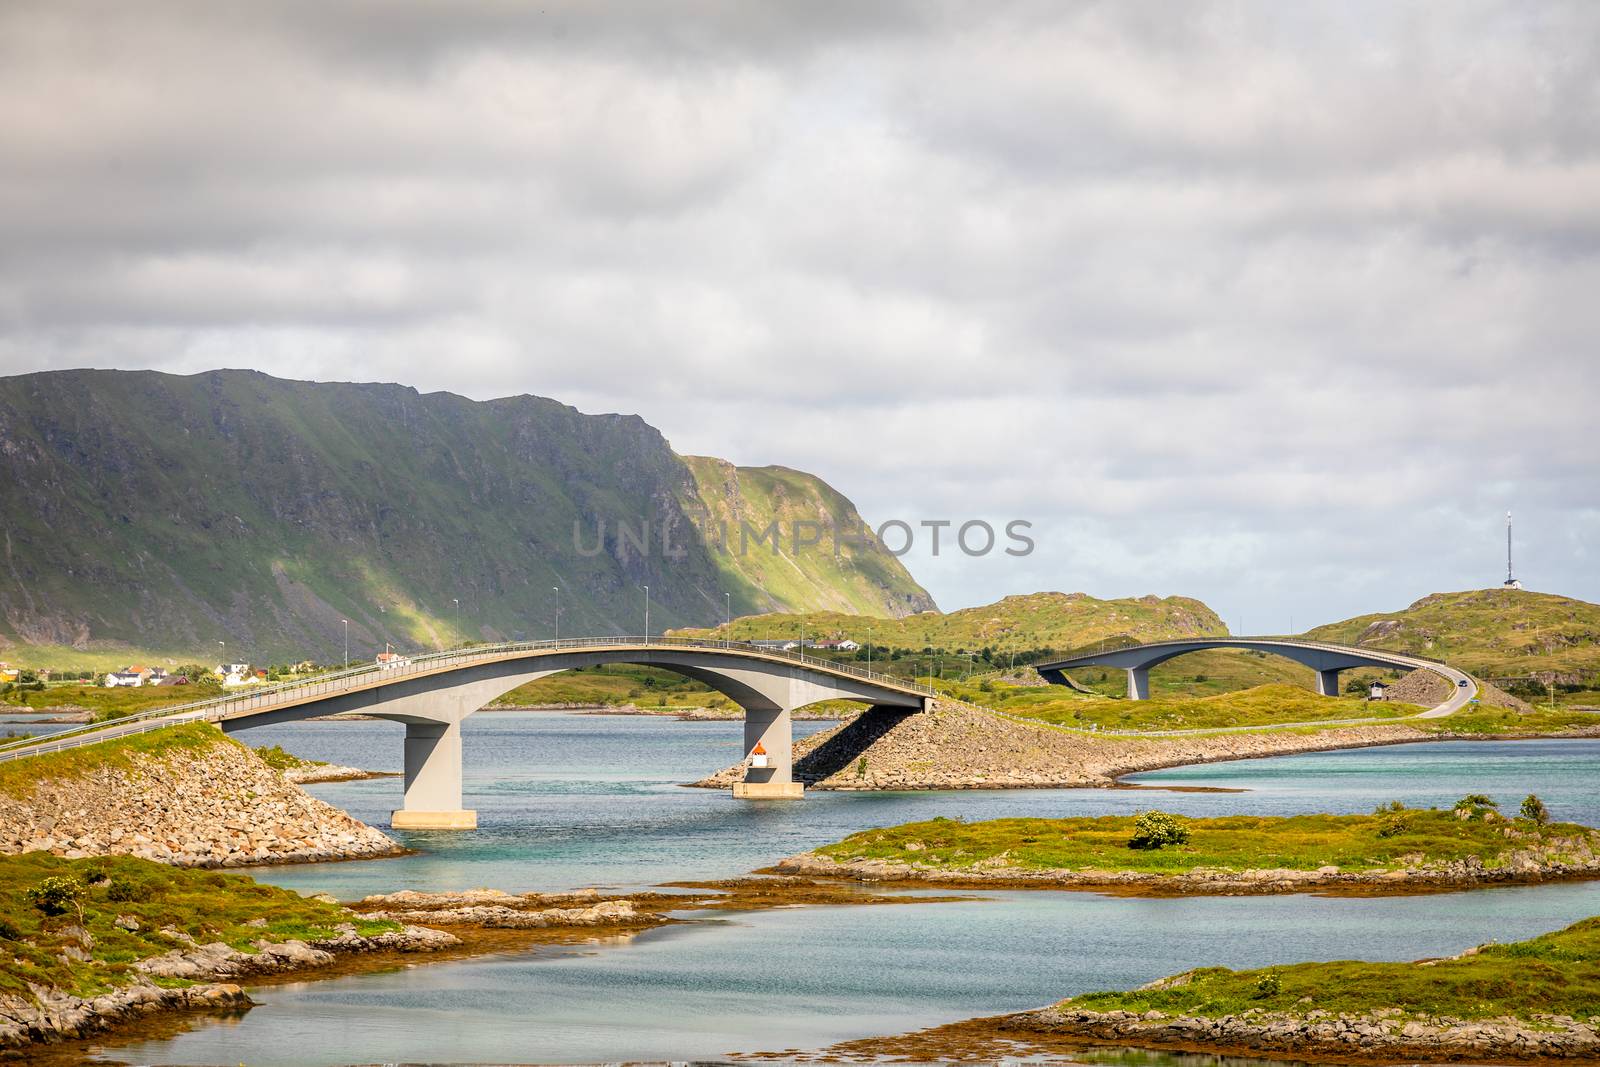 Twisted highway road with Freedvang bridges at the fjord, Lofote by ambeon